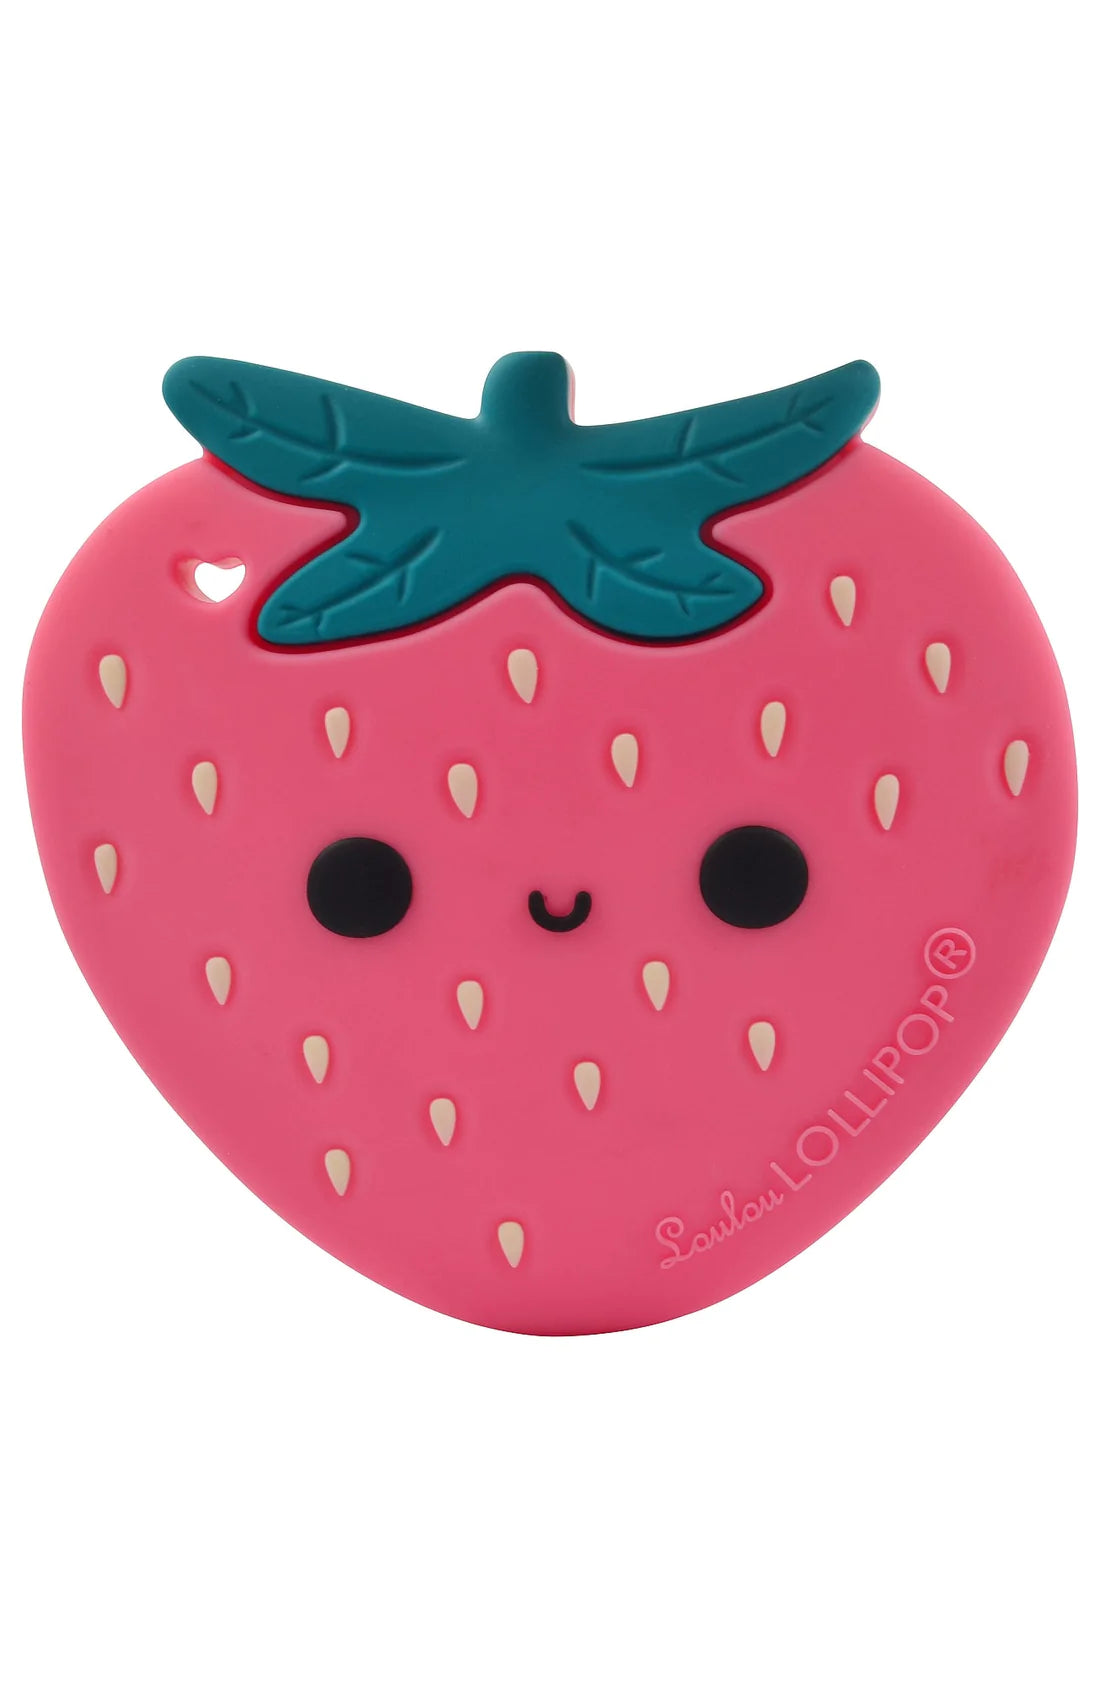 Loulou Lollipop Silicone Teether Collection